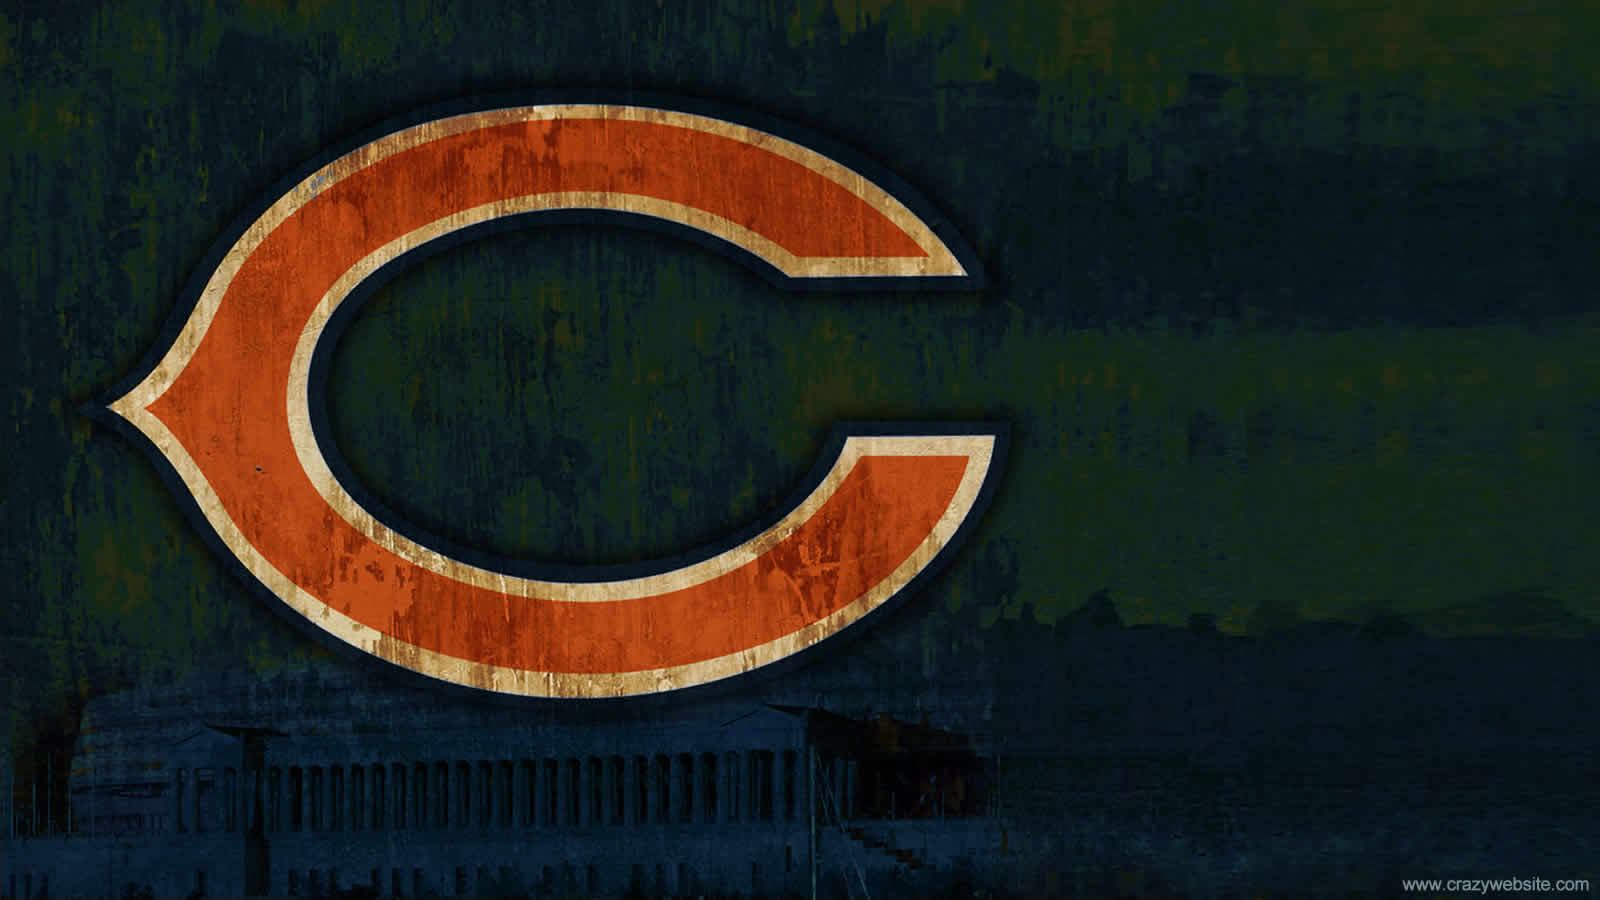 Your Favorite Nfc North Division Nfl Football Team The Chicago Bears